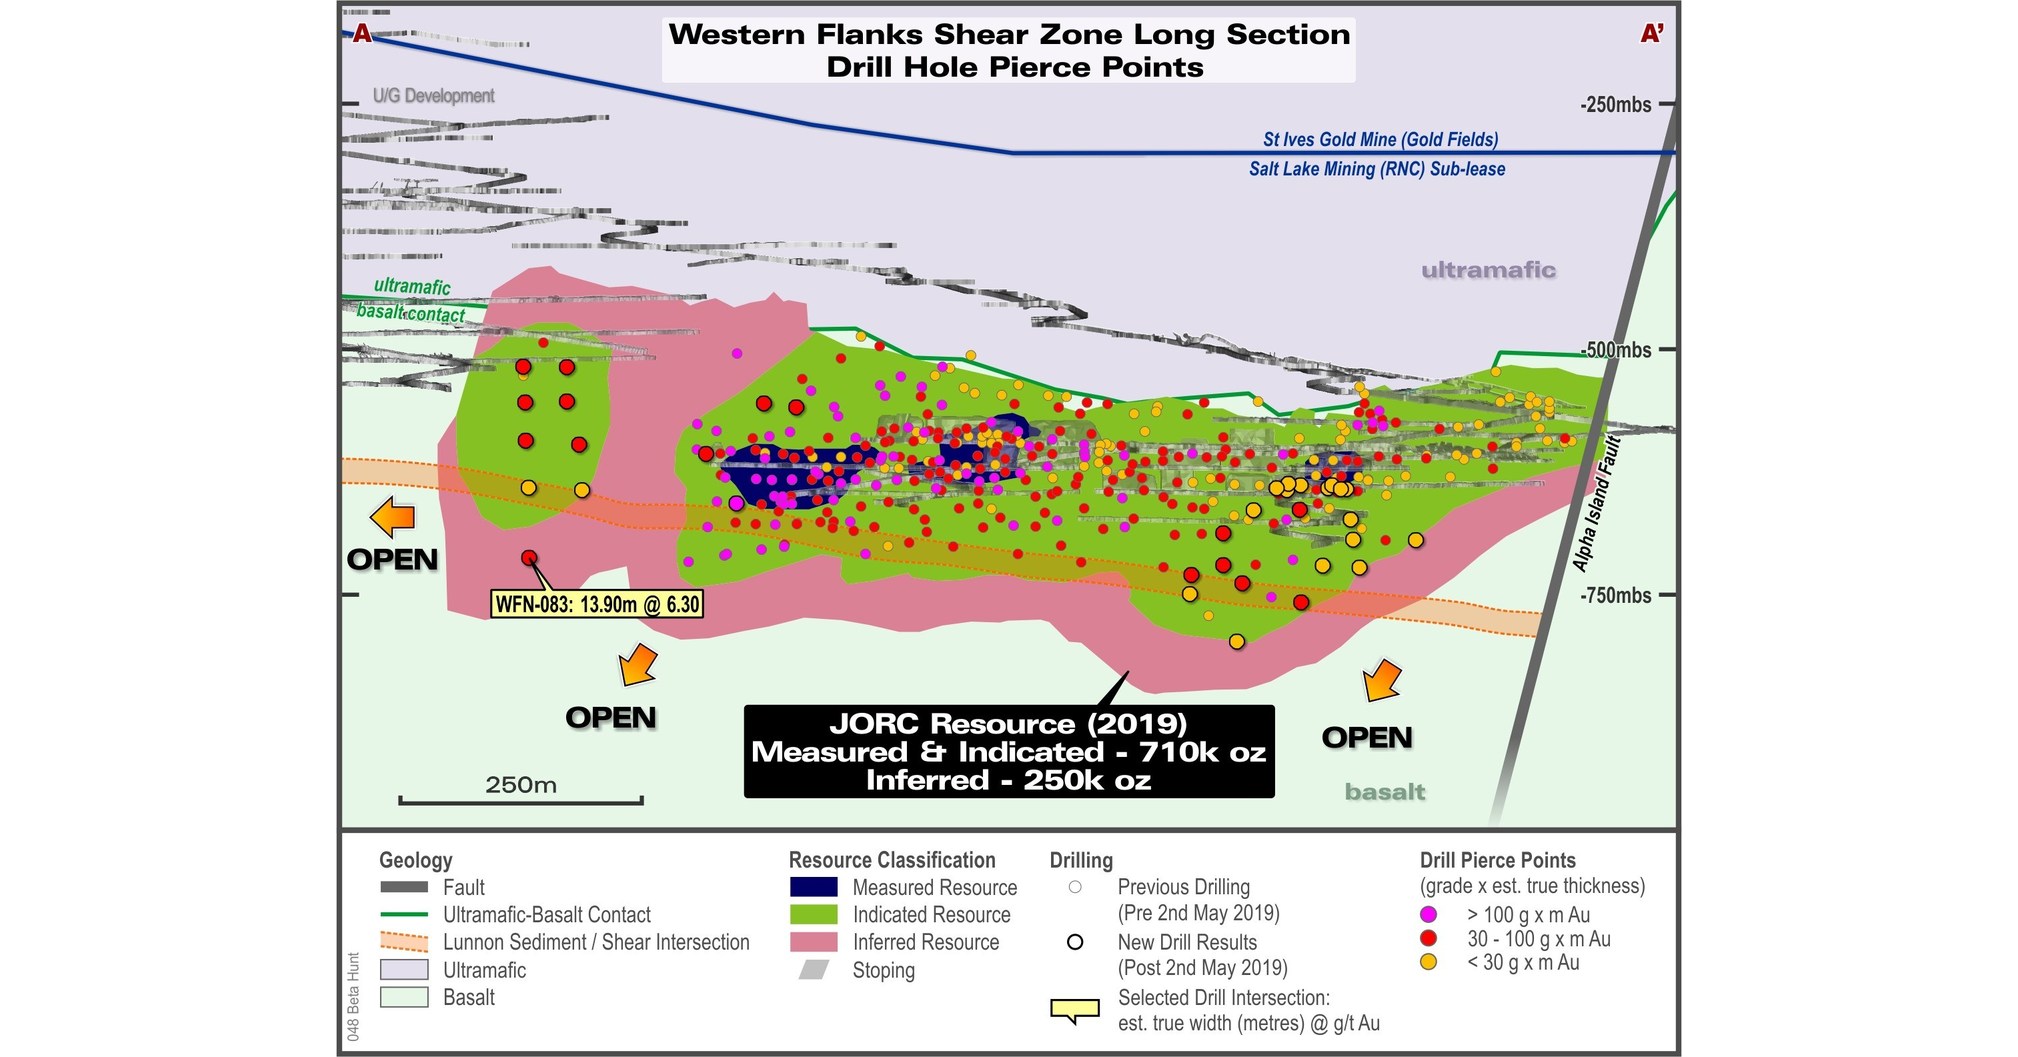 Rnc Minerals Announces 390 Increase In Measured And Indicated Gold Mineral Resource For The Western Flanks Zone At Beta Hunt To 710 Koz